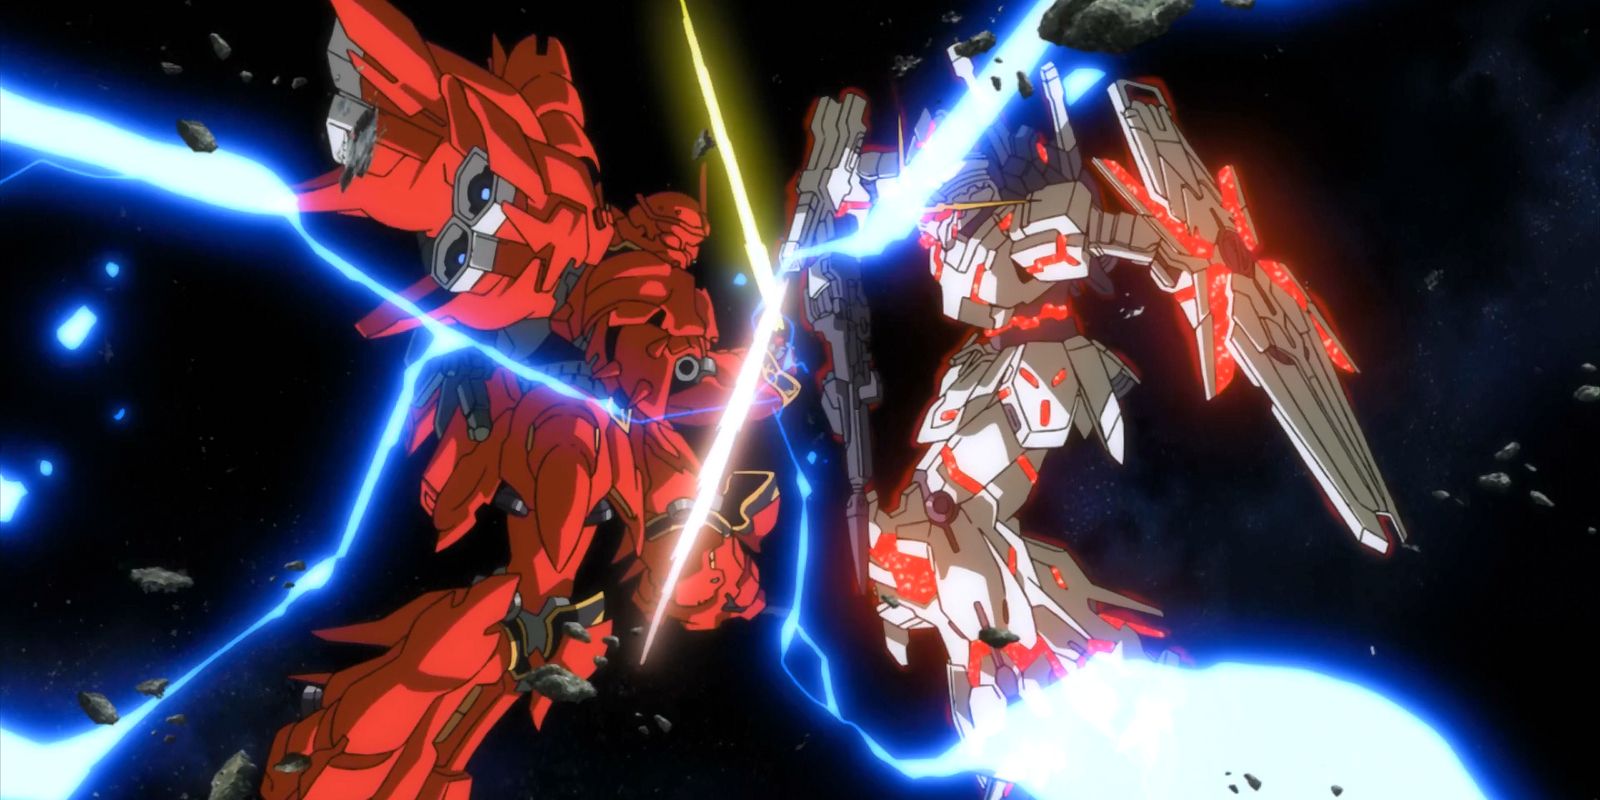 An image from Mobile Suit Gundam Unicorn.